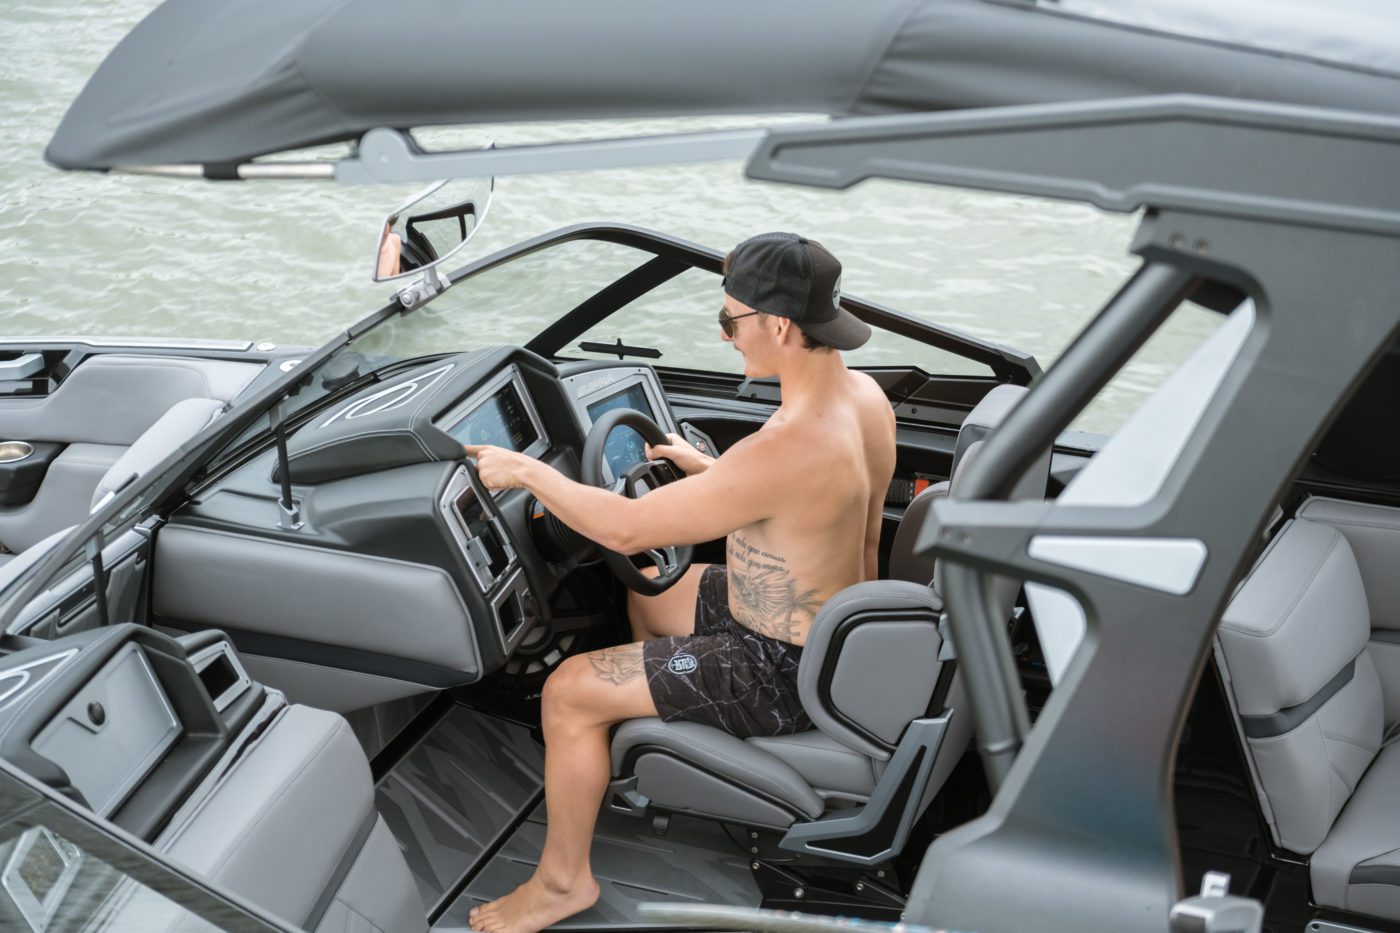 Boating Registration, as well as boat innovations, allow you to keep your boat and others safe.